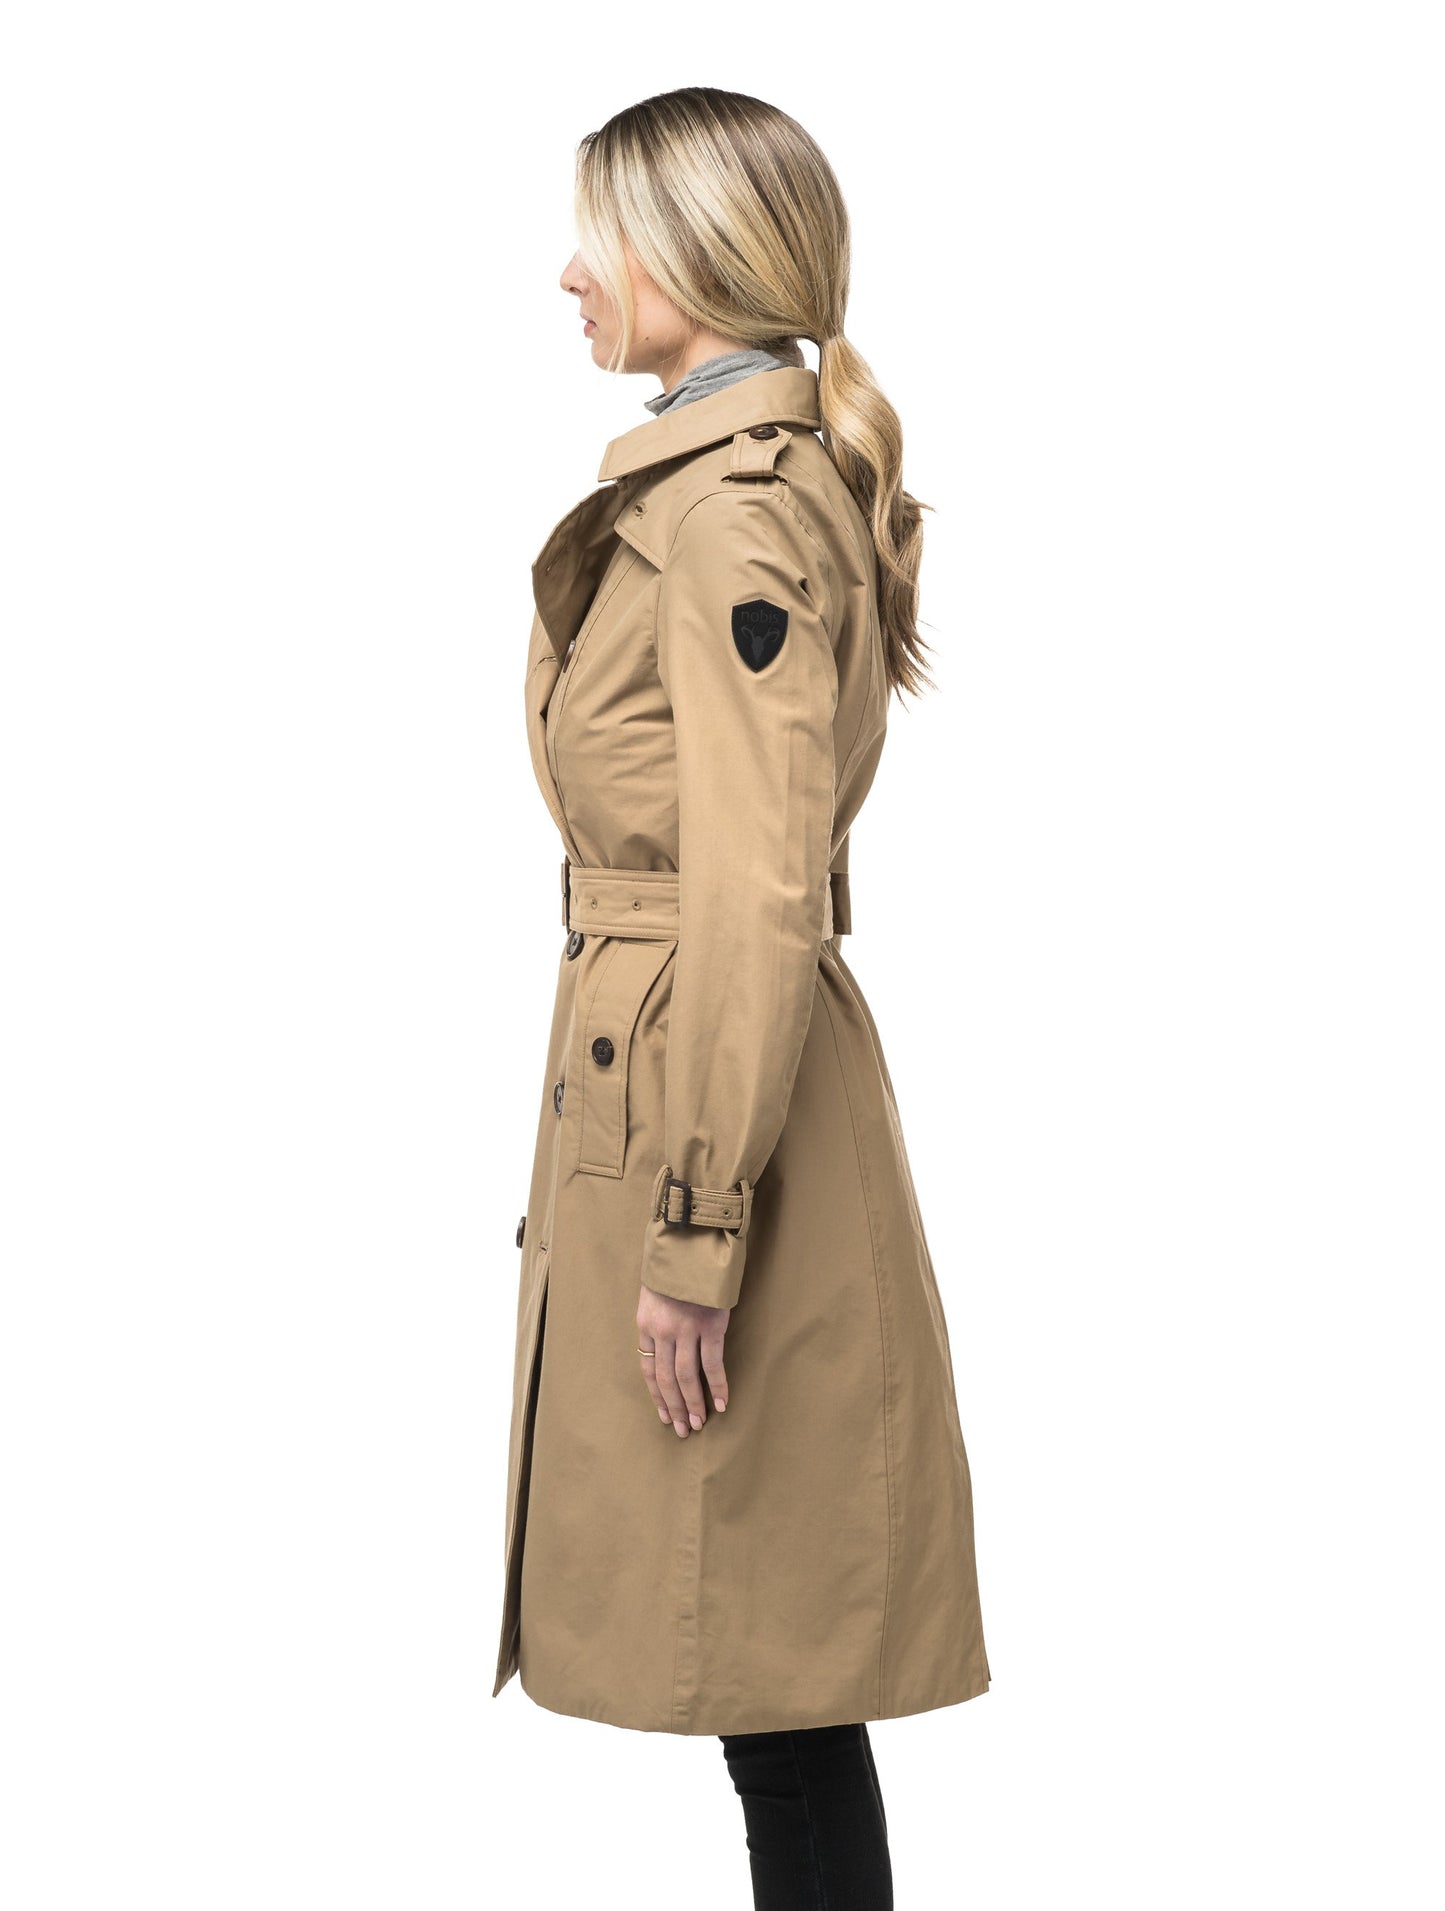 Women's knee length trench coat with removable belt in Cork